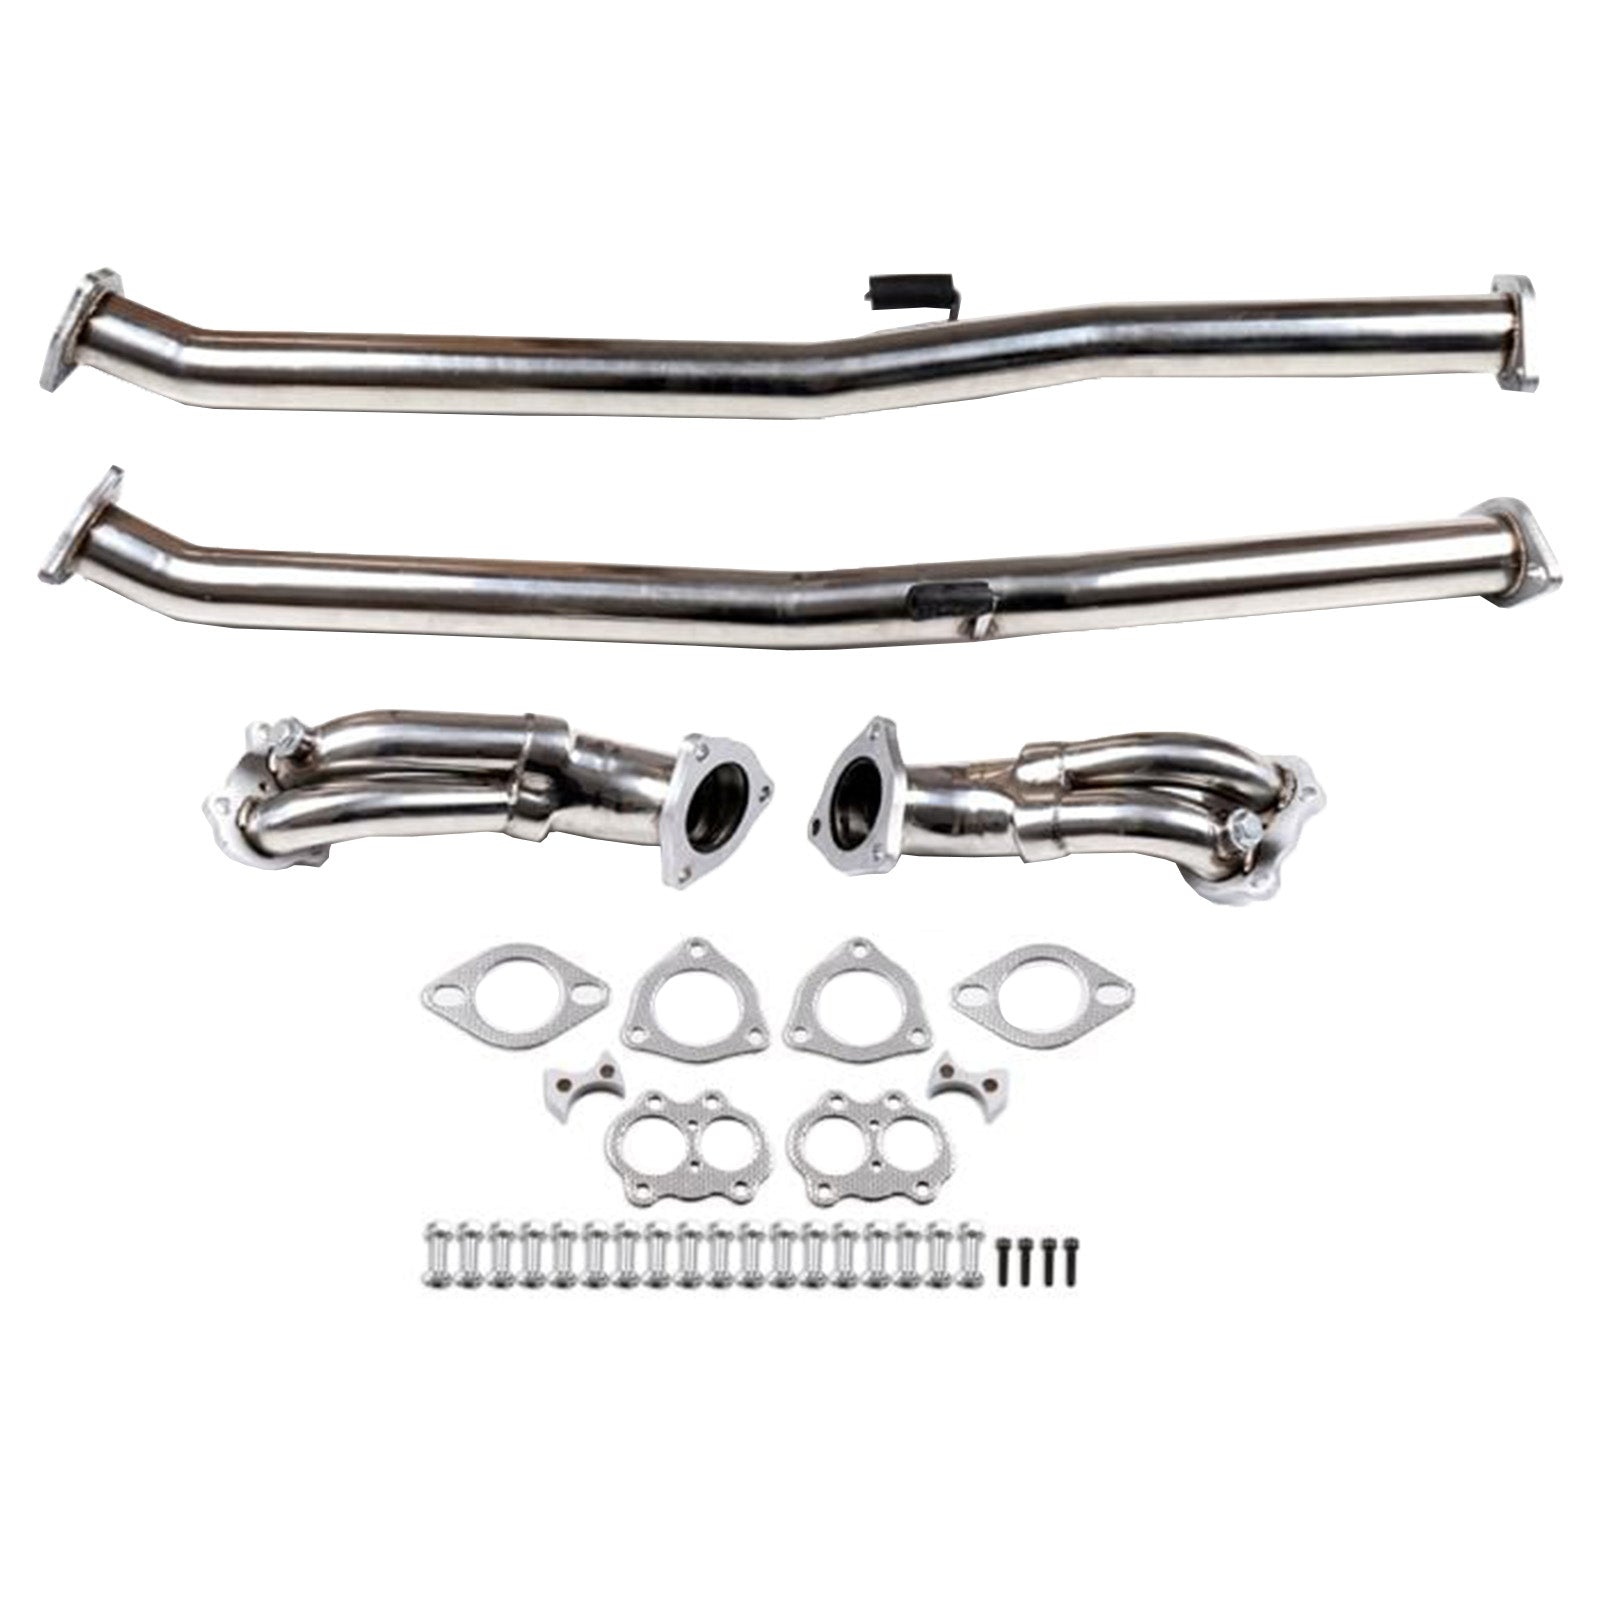 Nissan 1990-1996 300ZX Z32 Turbo 3.0L Stainless Steel Exhaust Downpipe